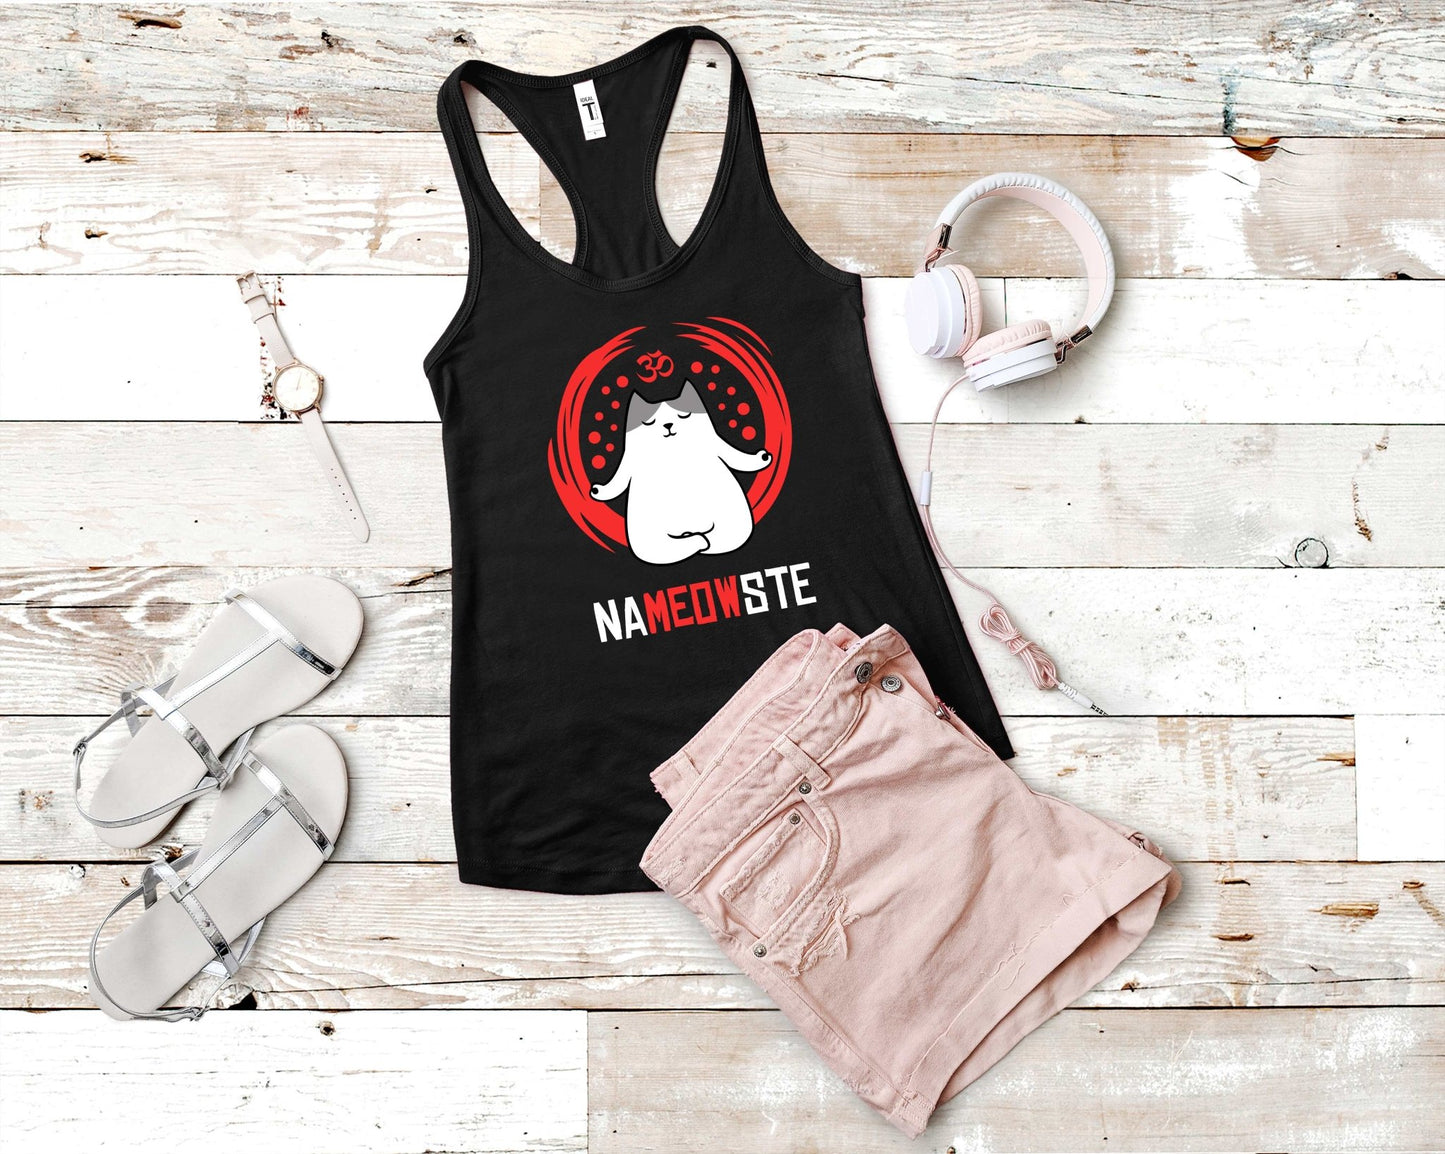 Na -Meow-Ste | Funny Yoga Shirt | Yoga Shirt for the Cat Lover